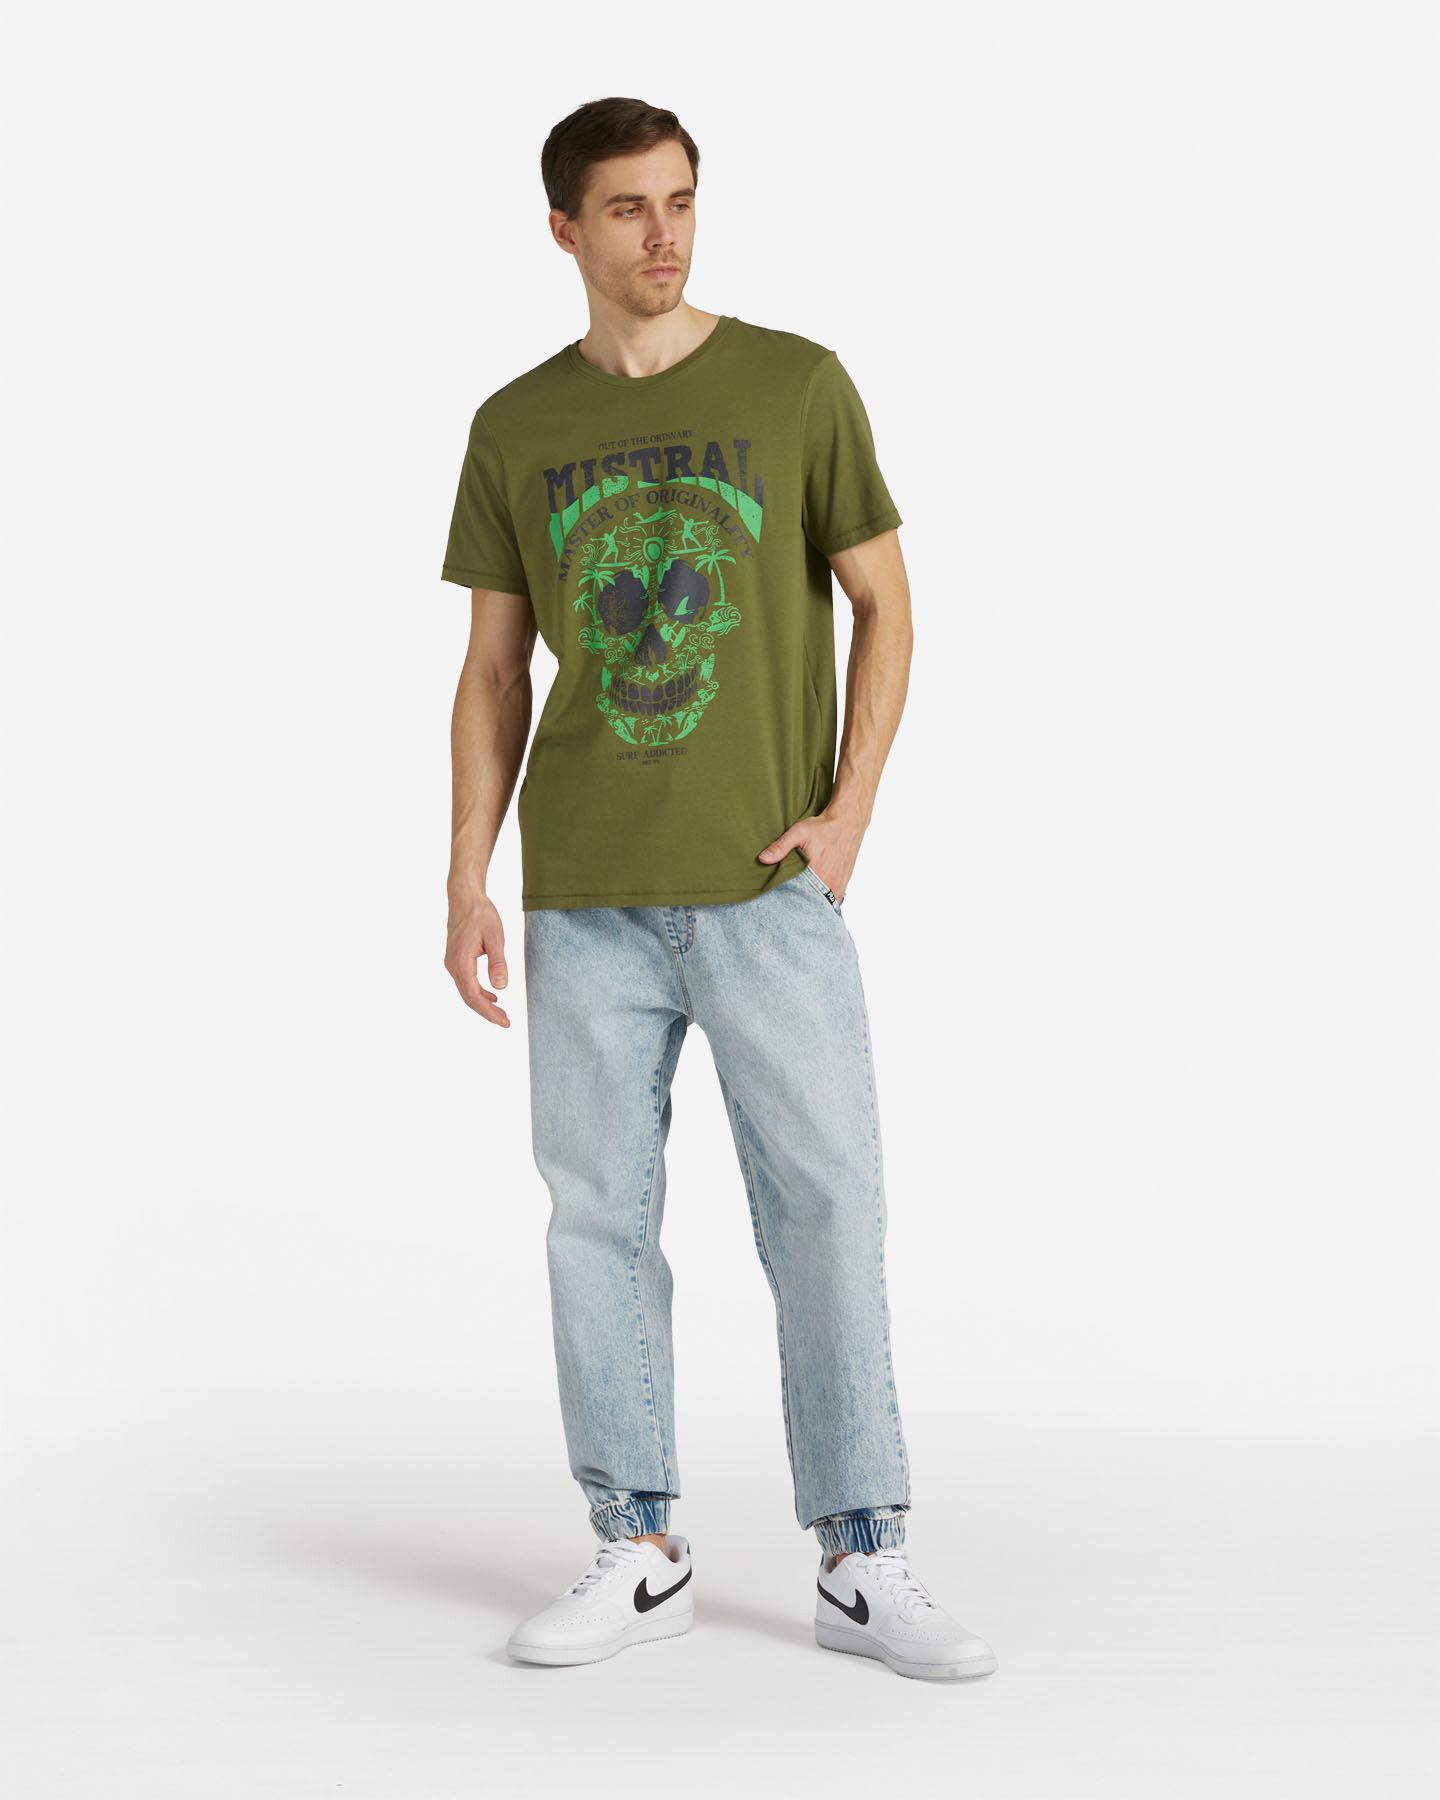  T-Shirt MISTRAL SURFSKULL M S4130286|1085|S scatto 1